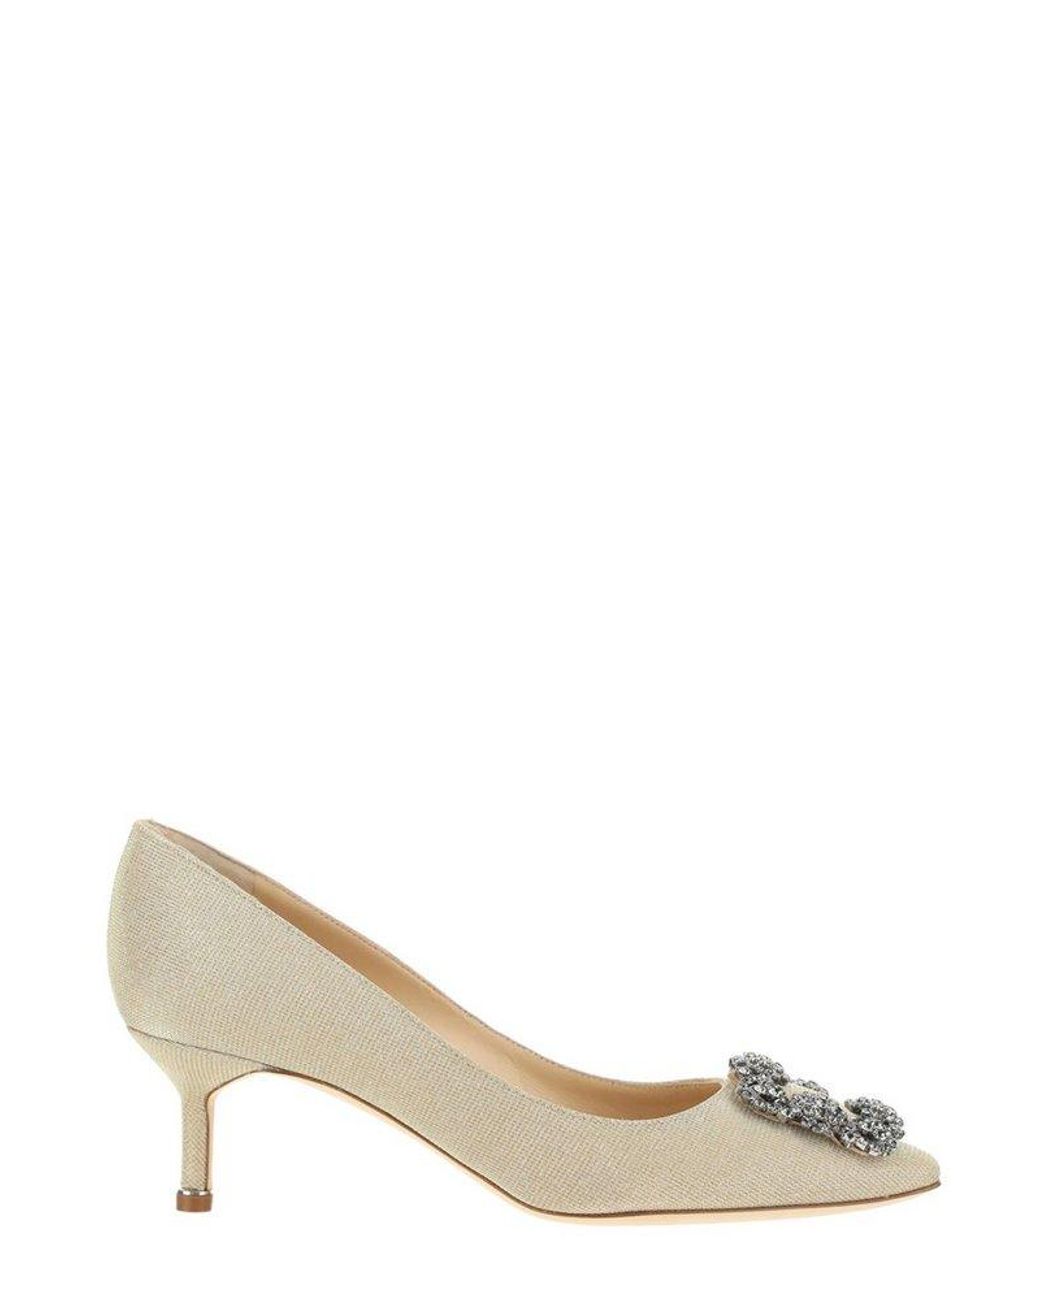 Manolo Blahnik Leather Manolo Balhnik Hangisi Pointed-toe Pumps in Gold ...